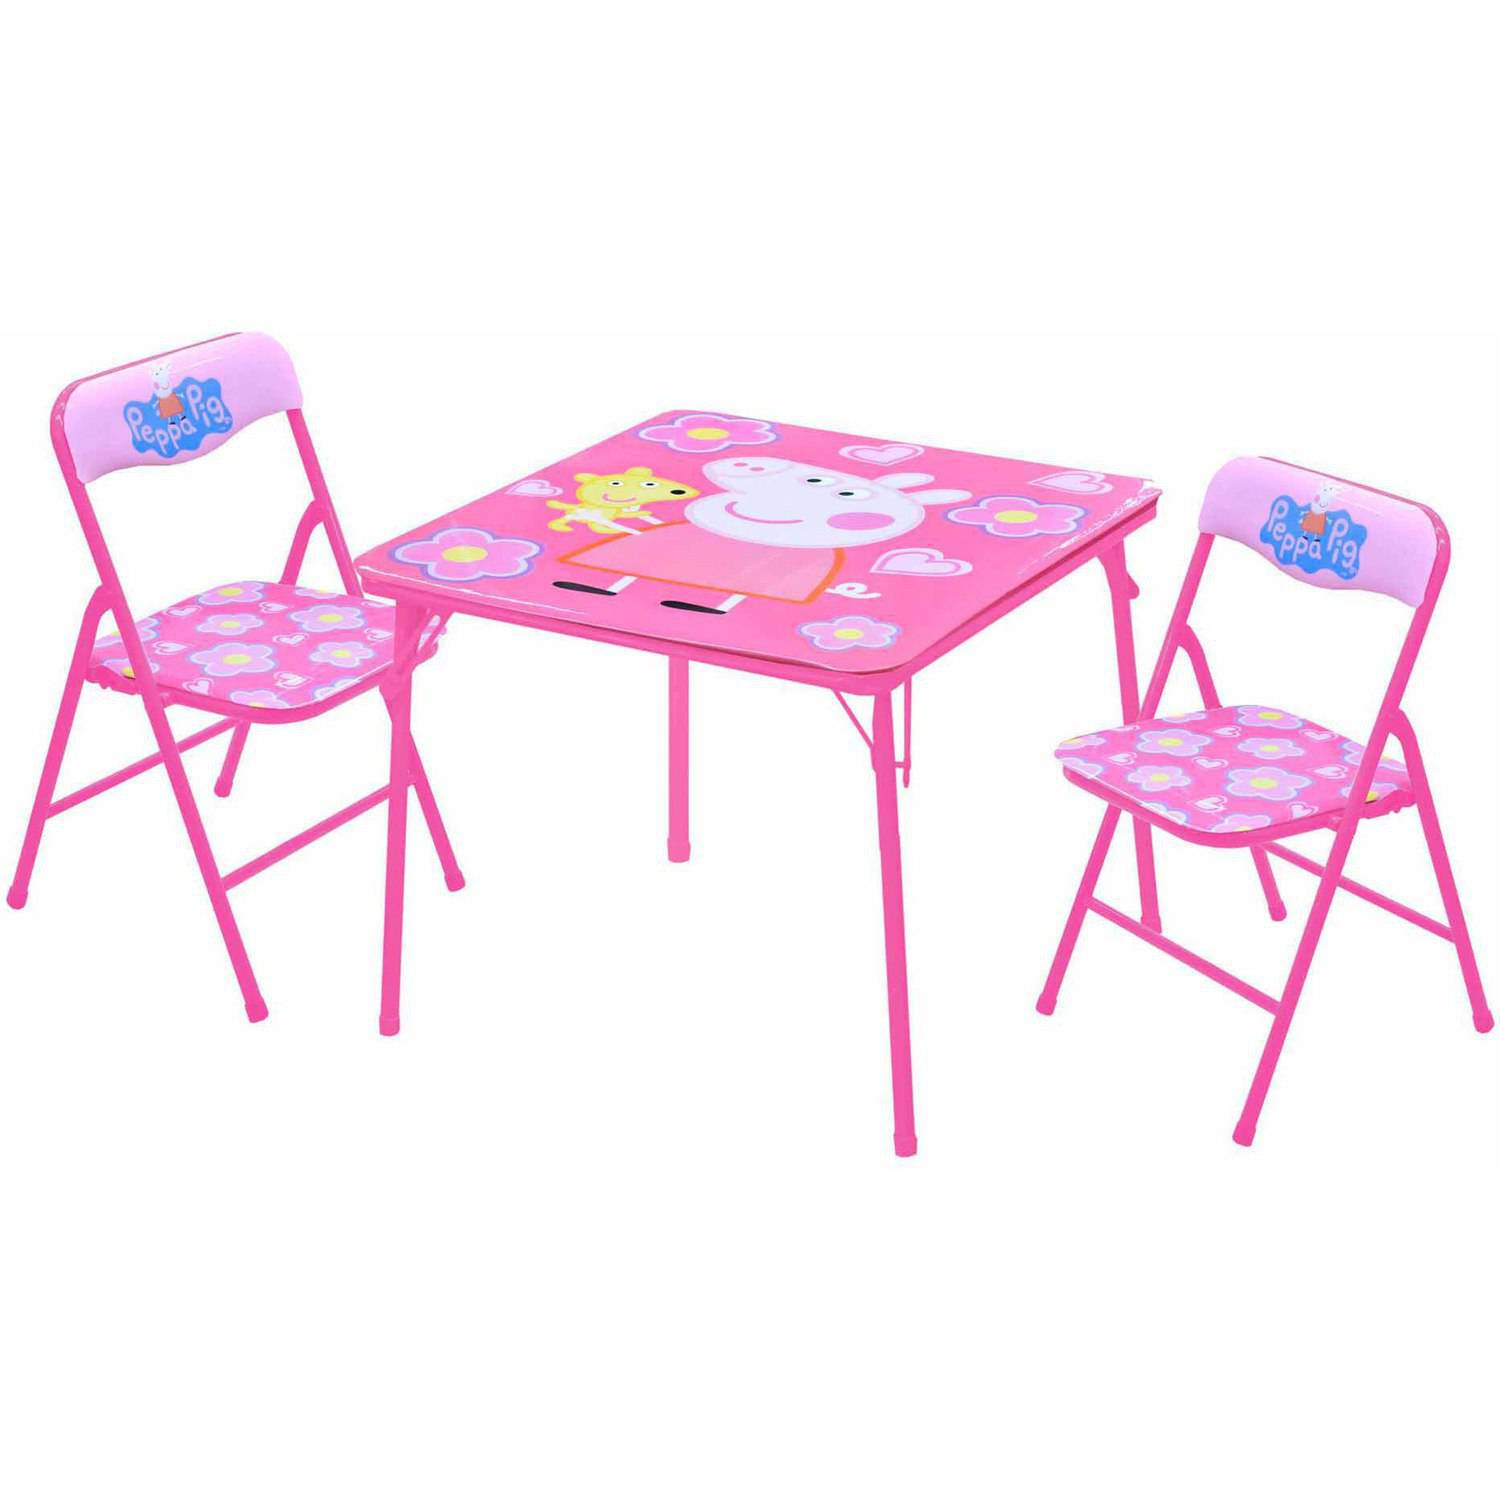 Peppa Pig Table And Chairs Set Walmart for dimensions 1500 X 1500